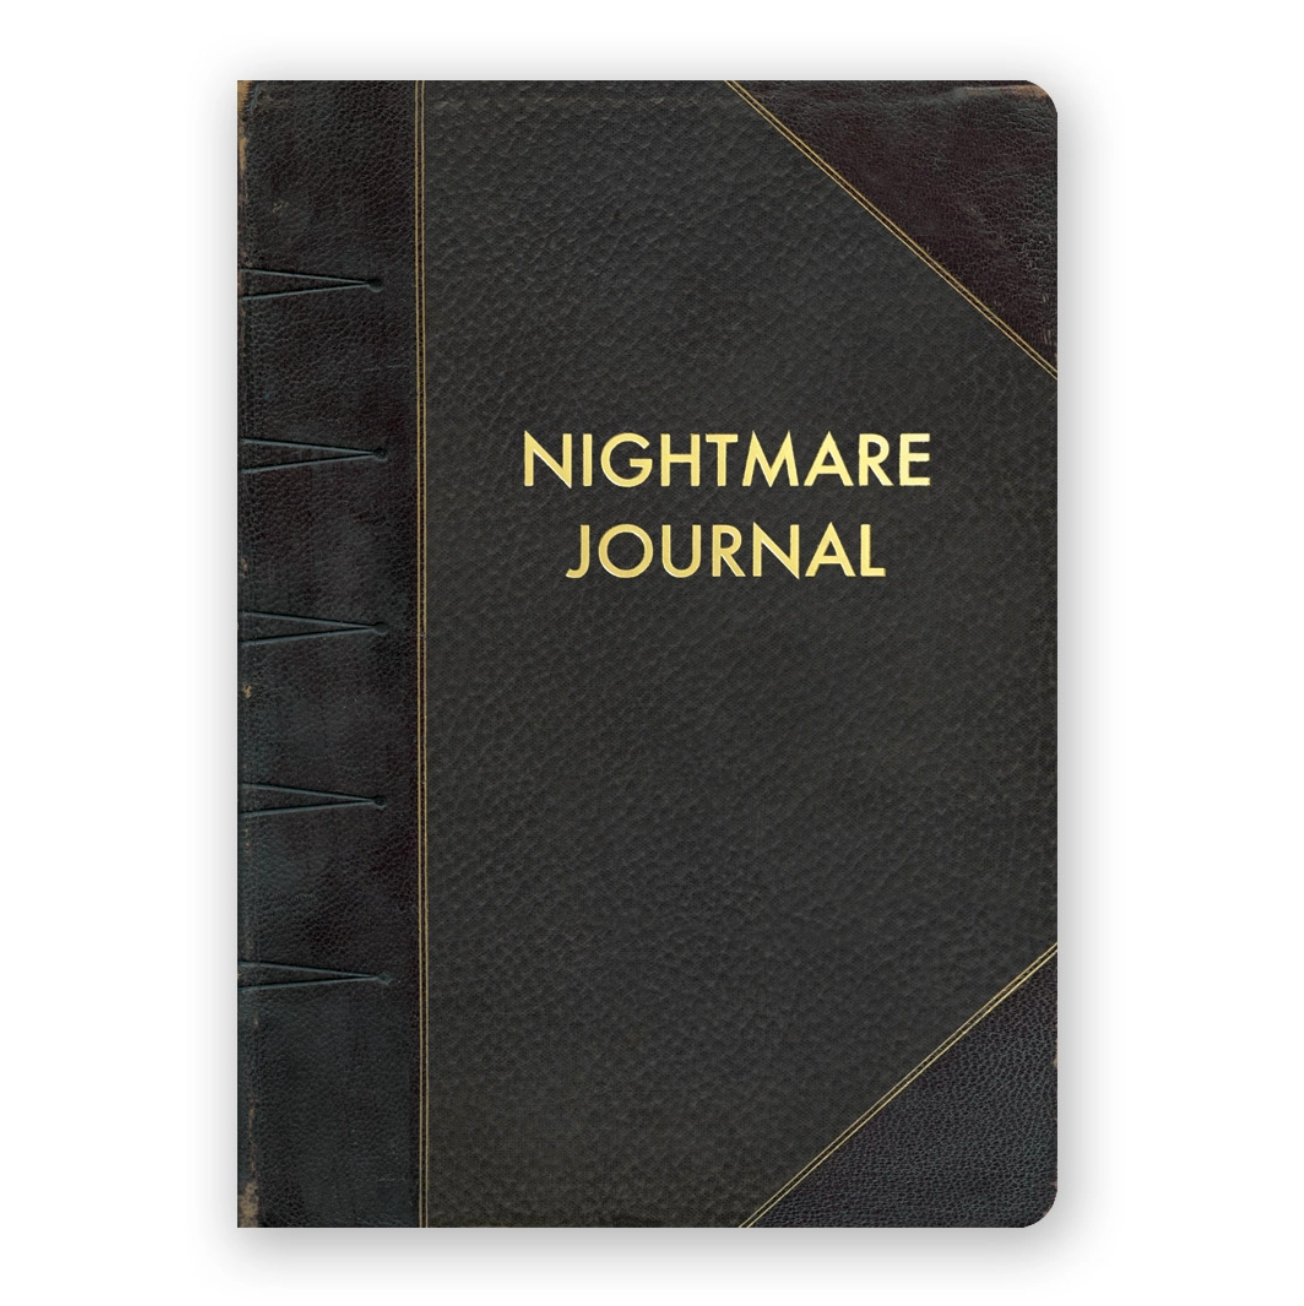 Vintage style nightmare journal norebook by The Mincing Mockingbird Sold by Le Monkey House